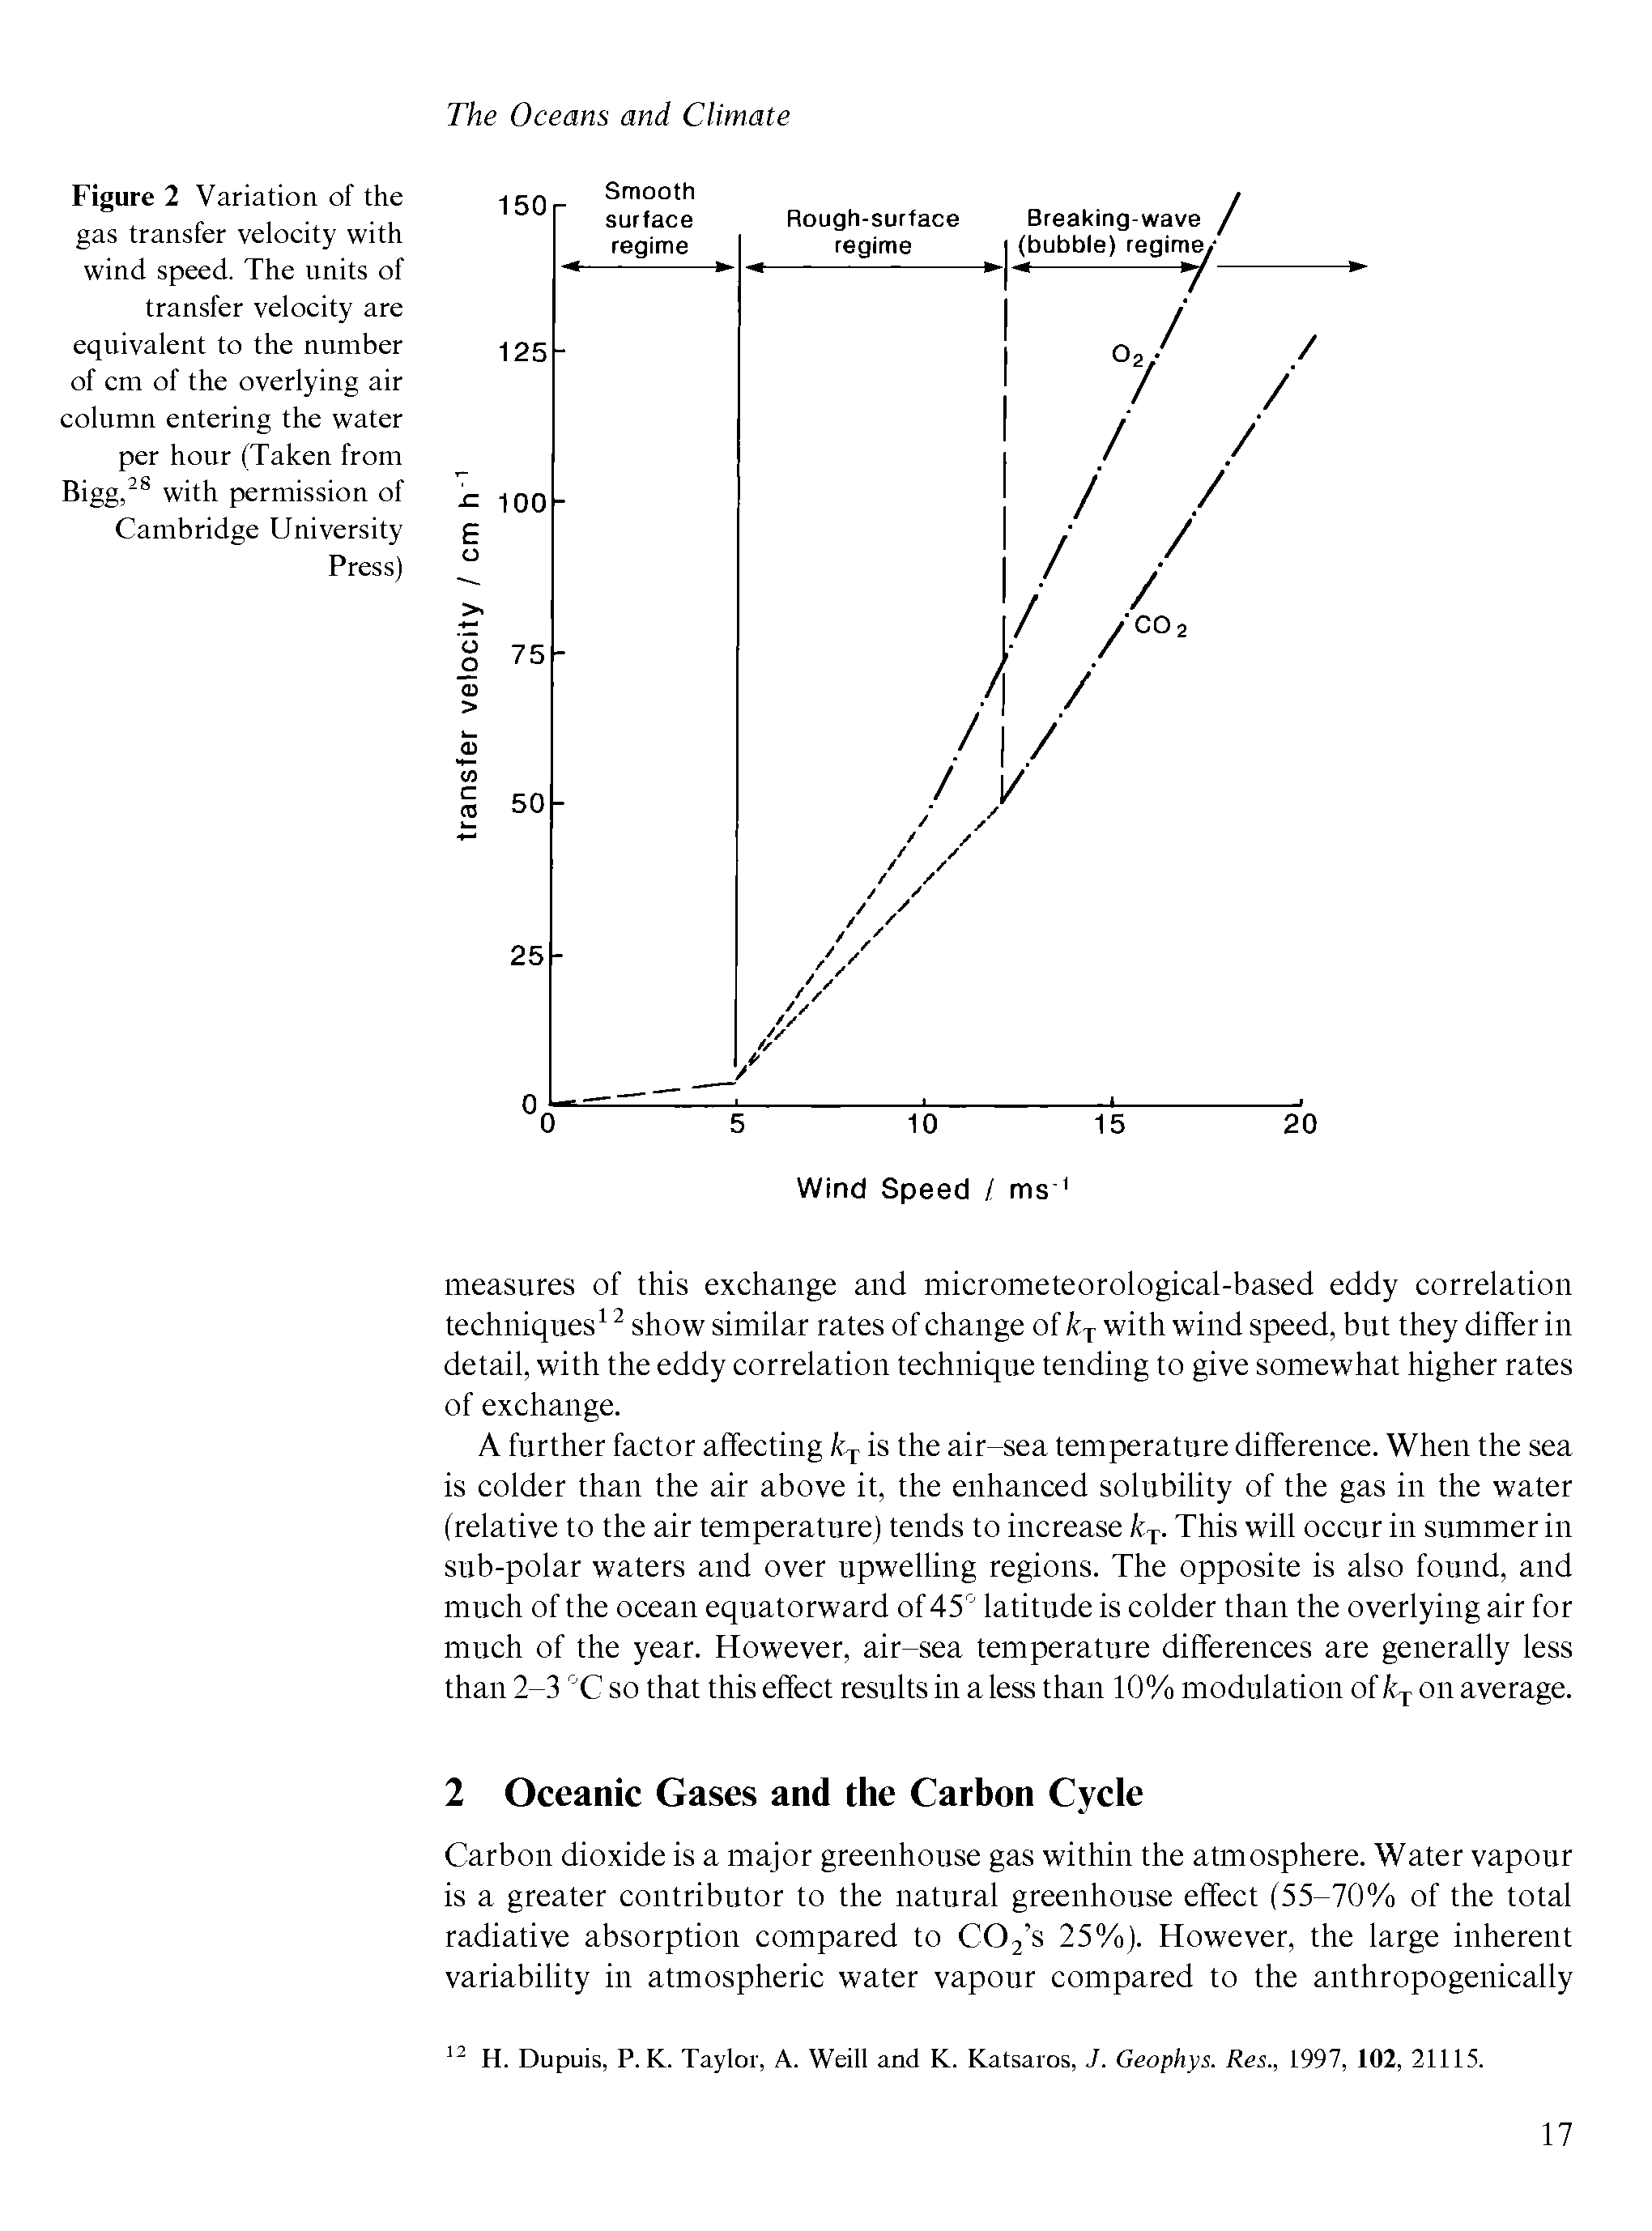 Figure 2 Variation of the gas transfer veloeity with wind speed. The units of transfer veloeity are equivalent to the number of em of the overlying air eolumn entering the water per hour (Taken from Bigg," with permission of Cambridge University Press)...